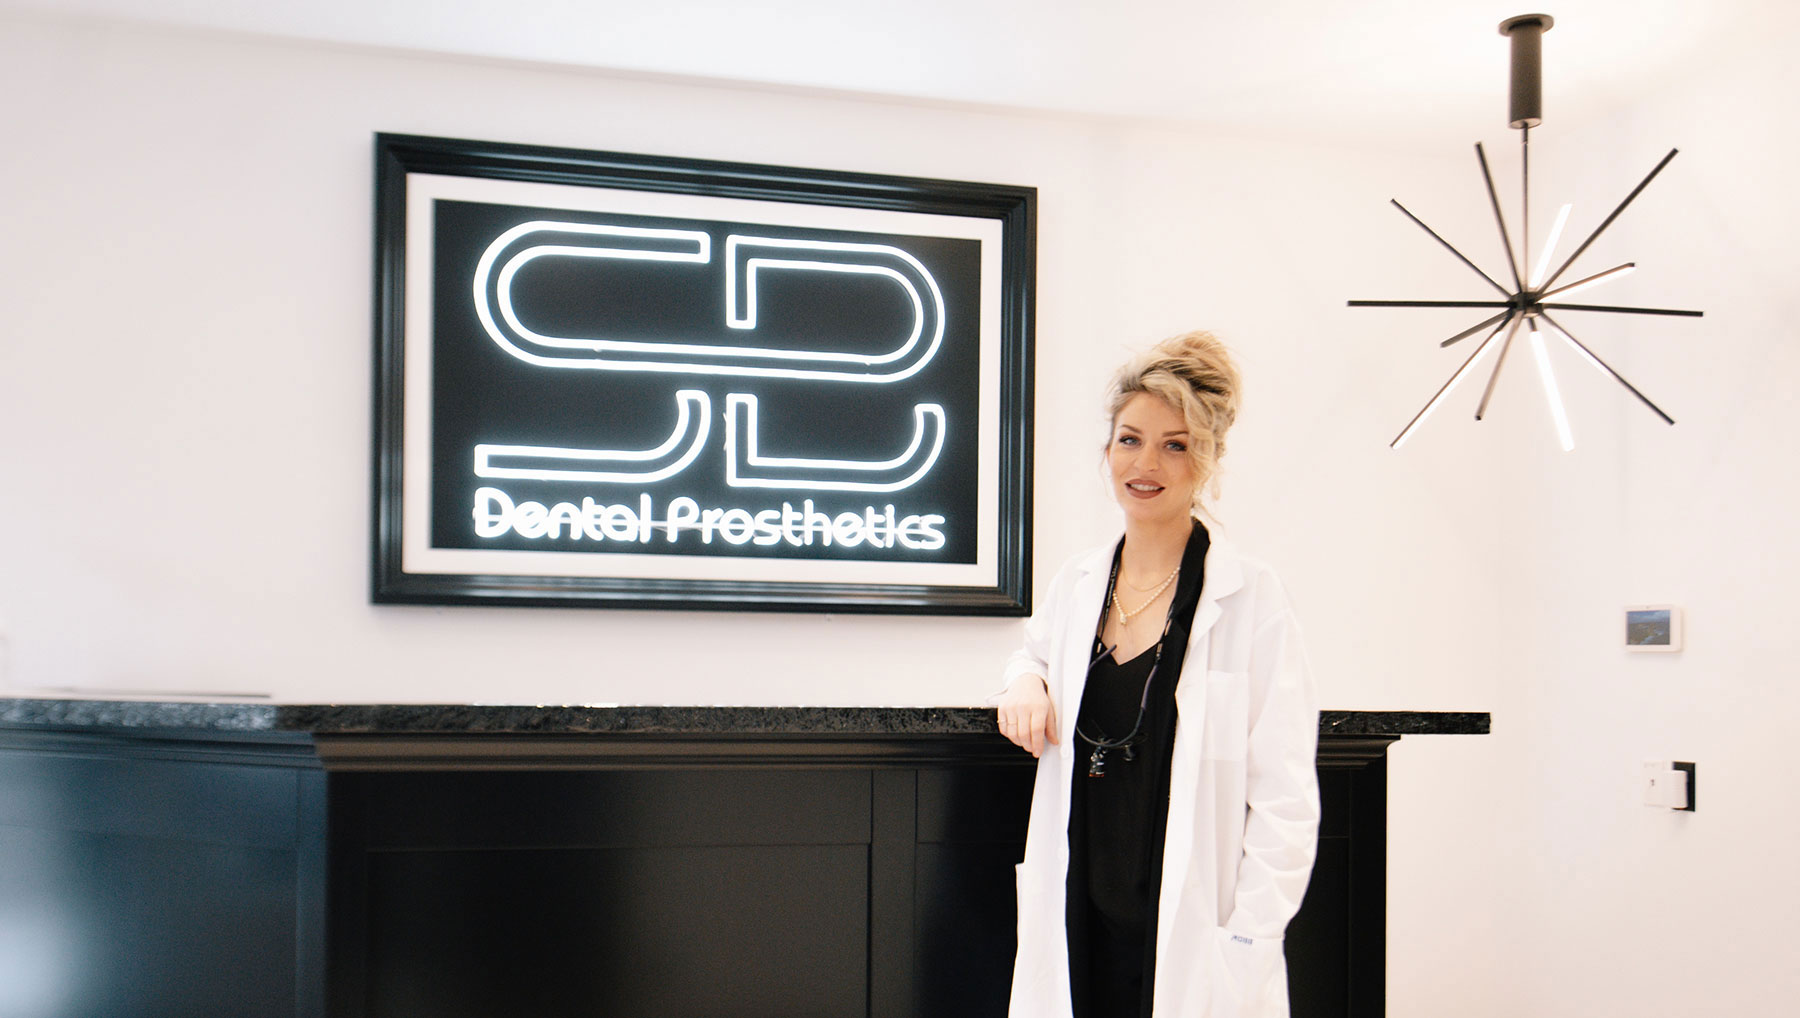 The denturist and owner of SB Denture clinic posing for a photo in front of the reception desk and neon lit company logo close up